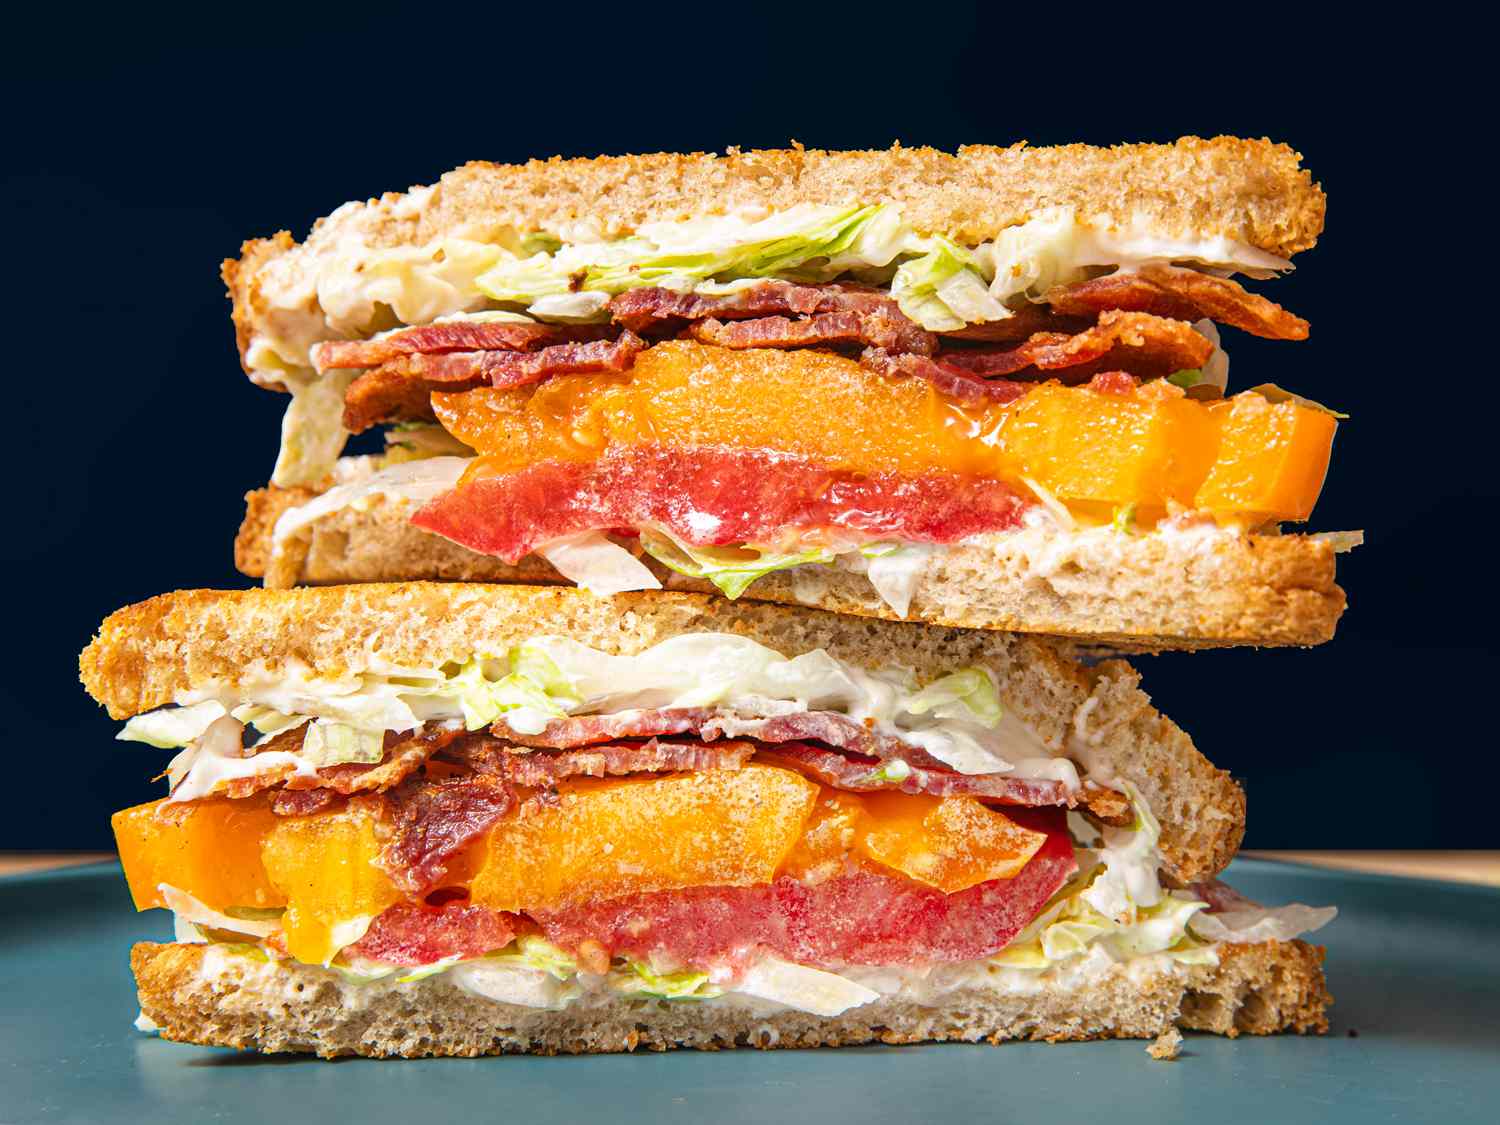 Two halves of a BLT stacked on top of each other